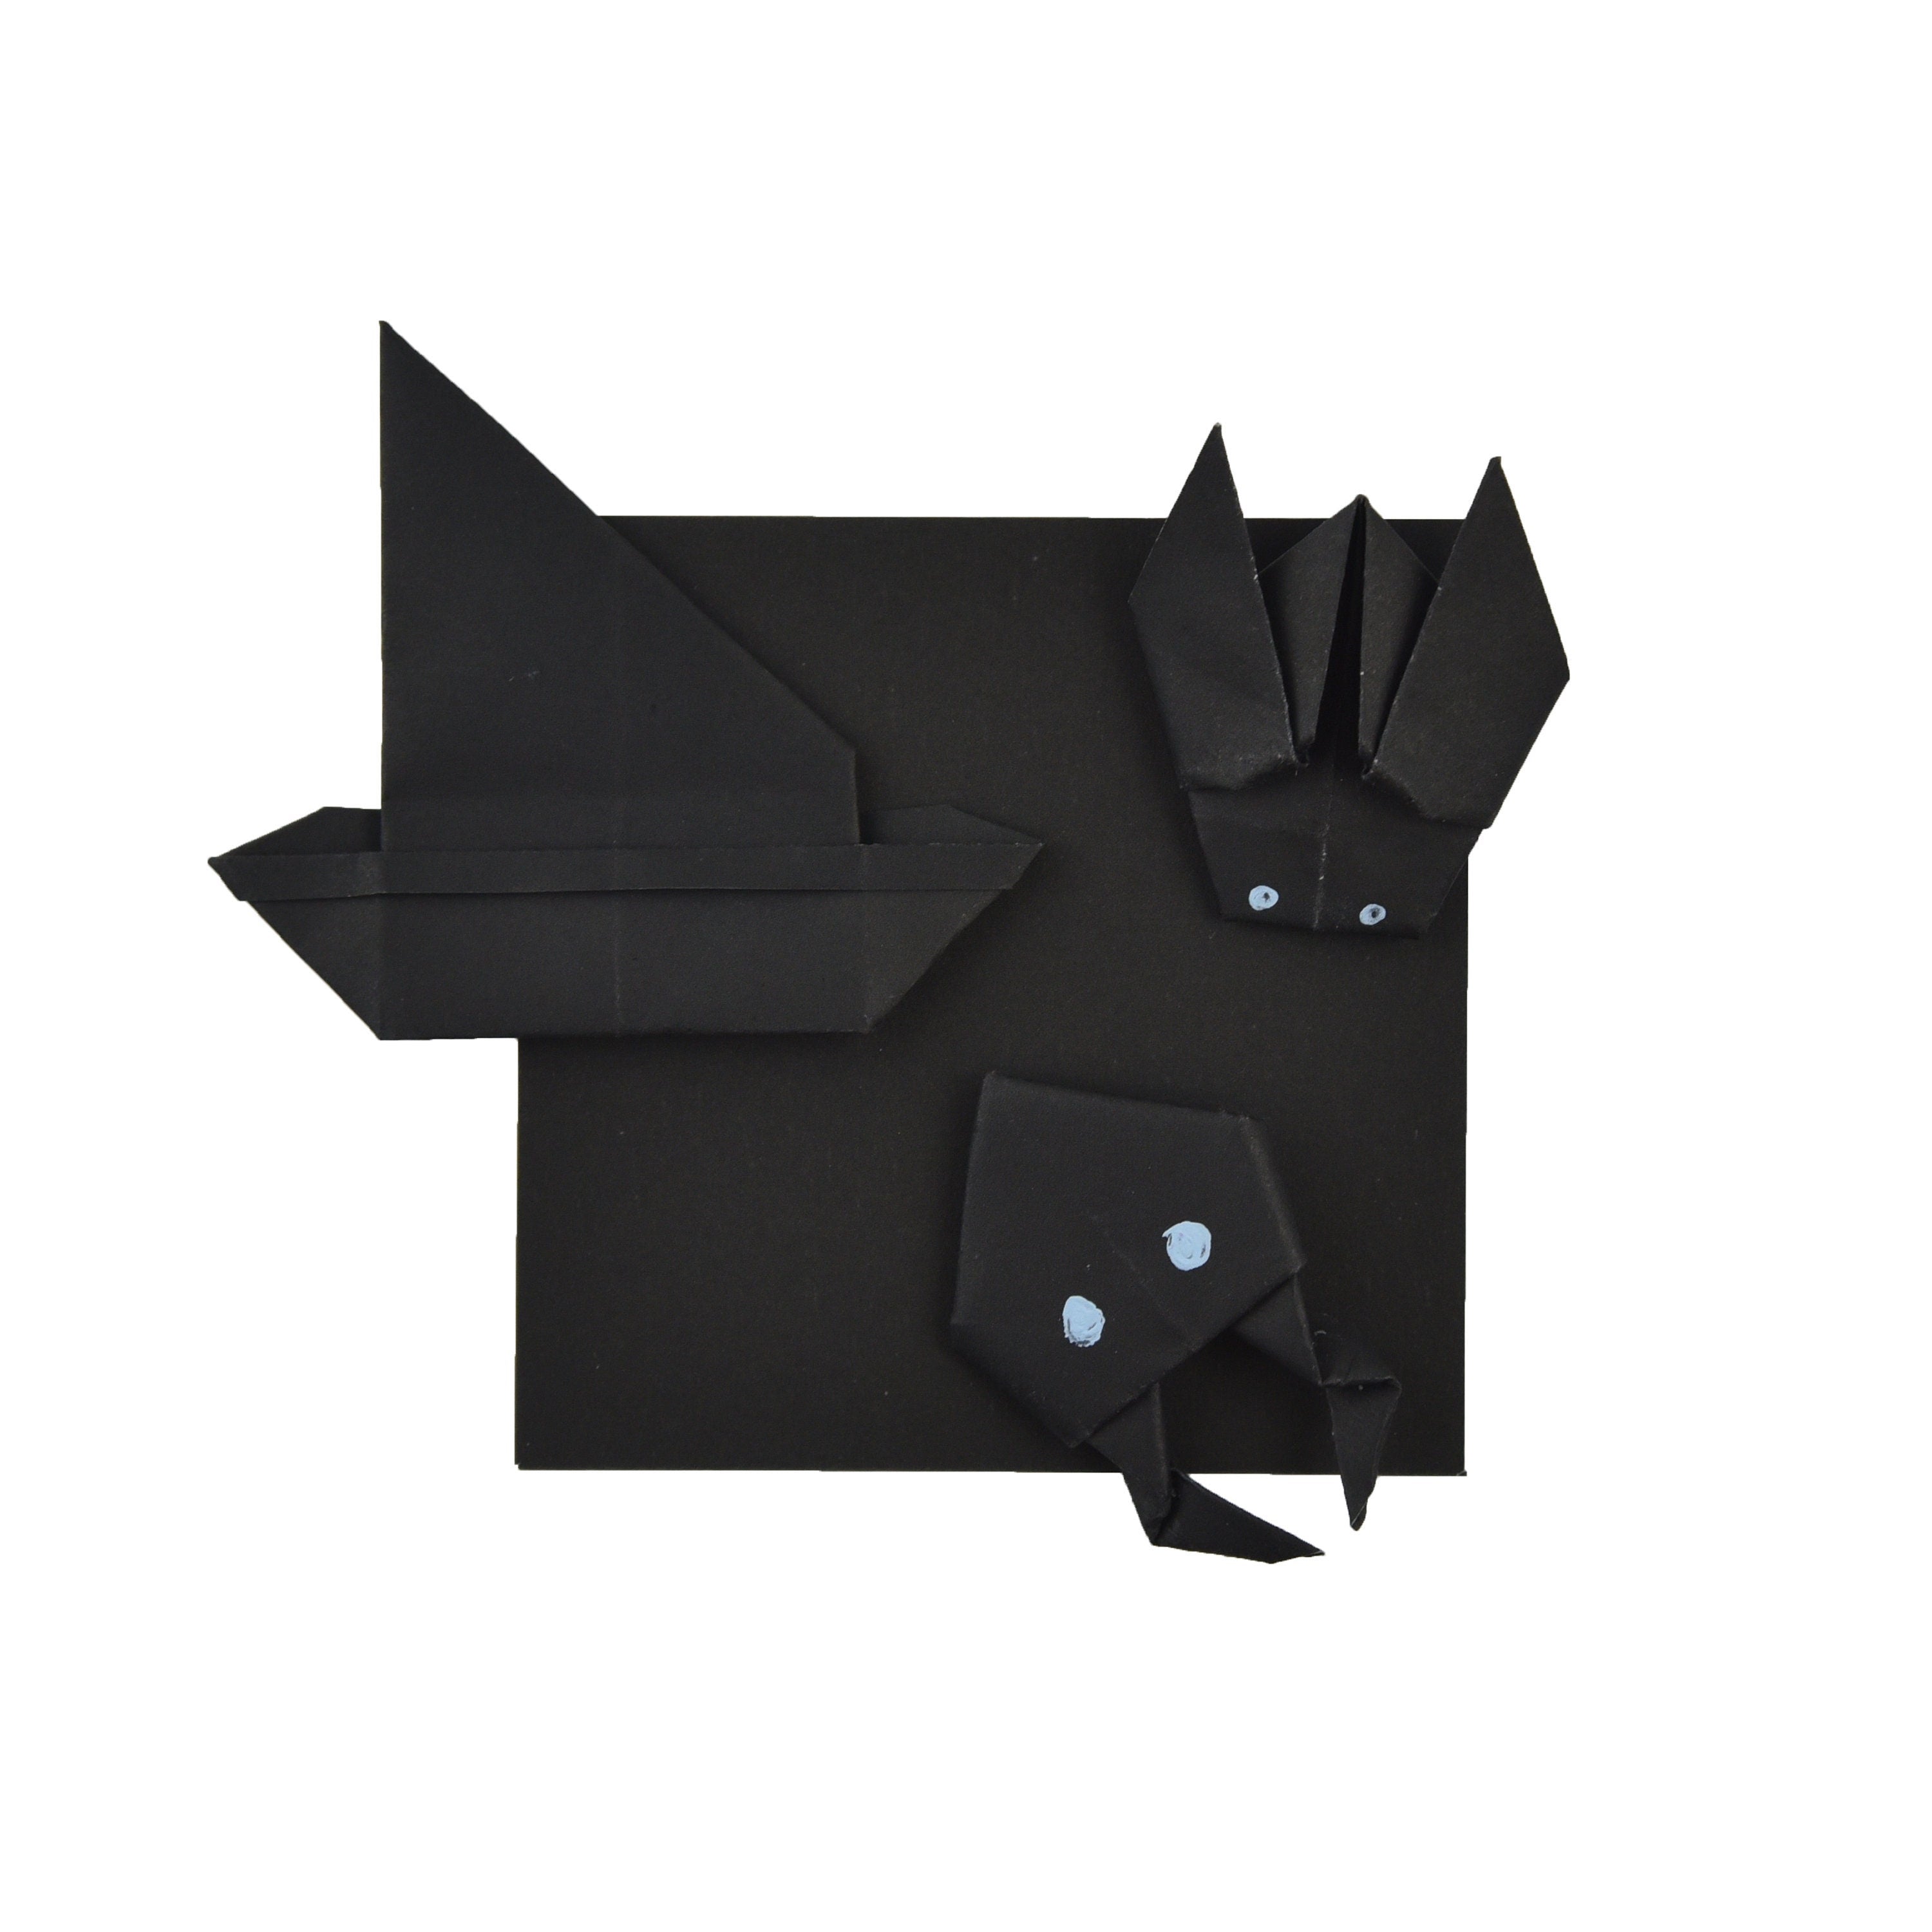 100 Black Origami Paper Sheets 3x3 inches Square Paper Pack for Folding, Origami Cranes, and Decoration - S11